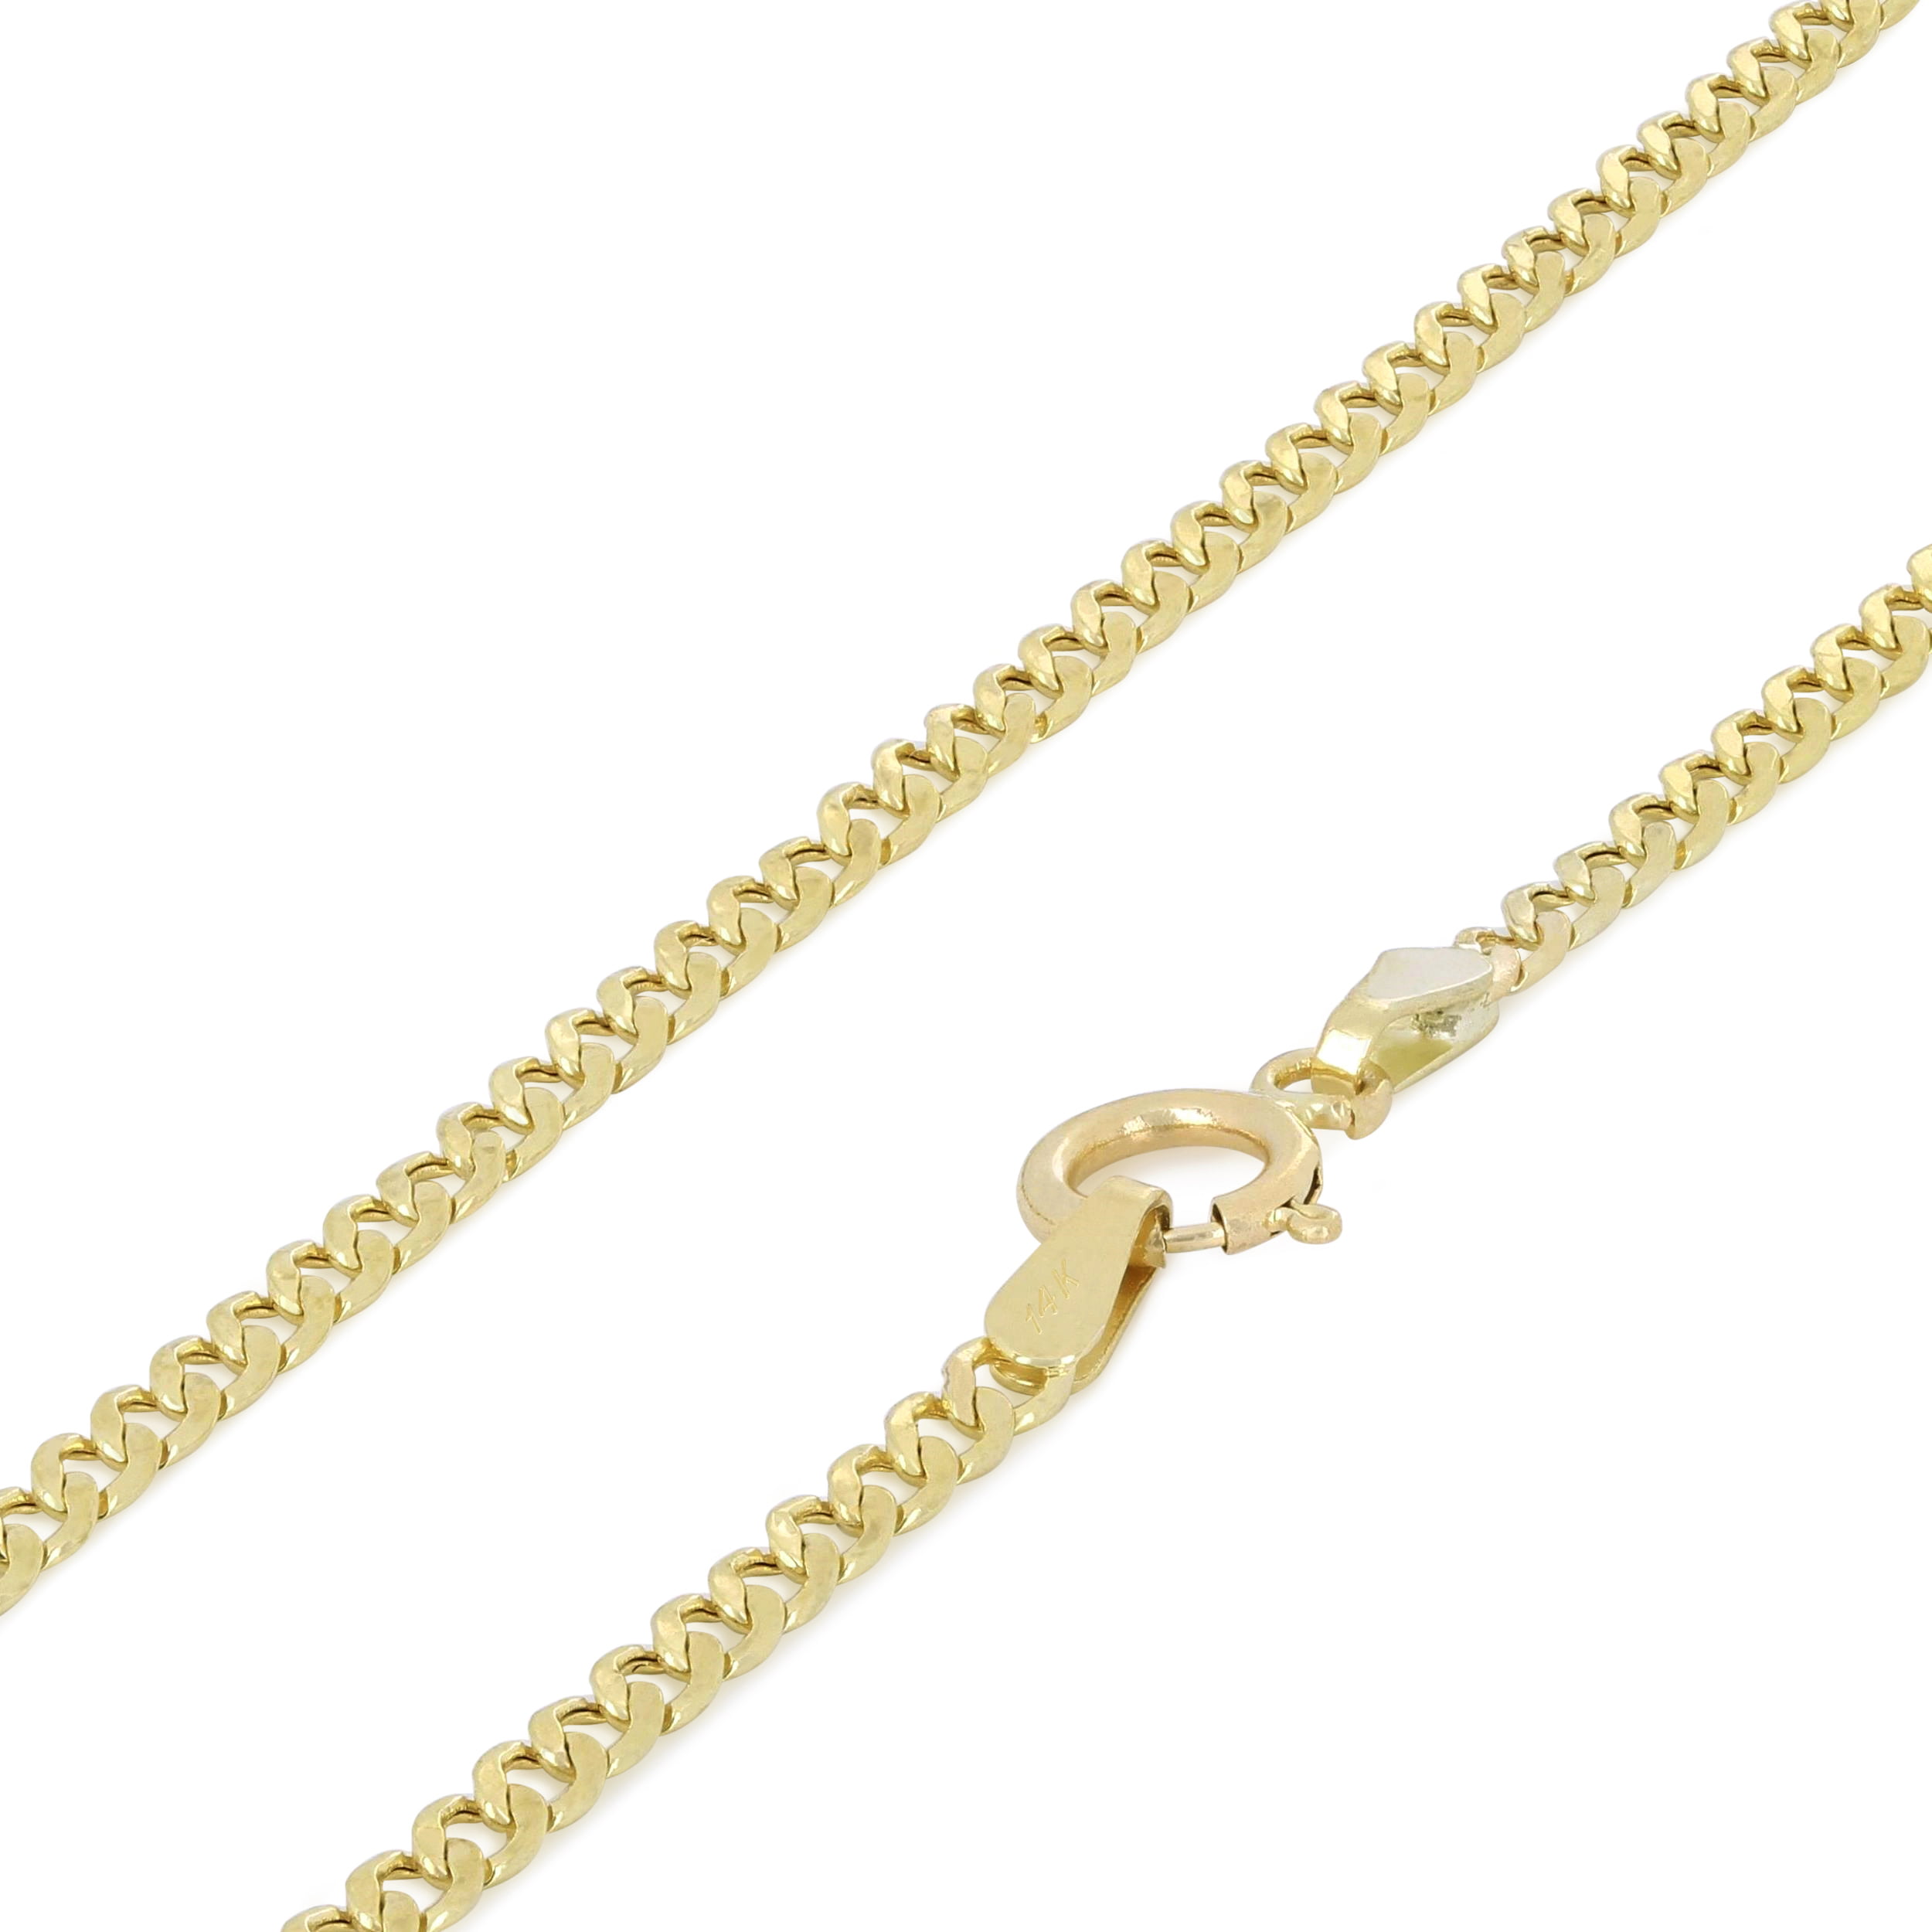 Sonia Jewels 14k Yellow Gold Hollow Square Franco Chain Necklace With Lobster Claw Clasp